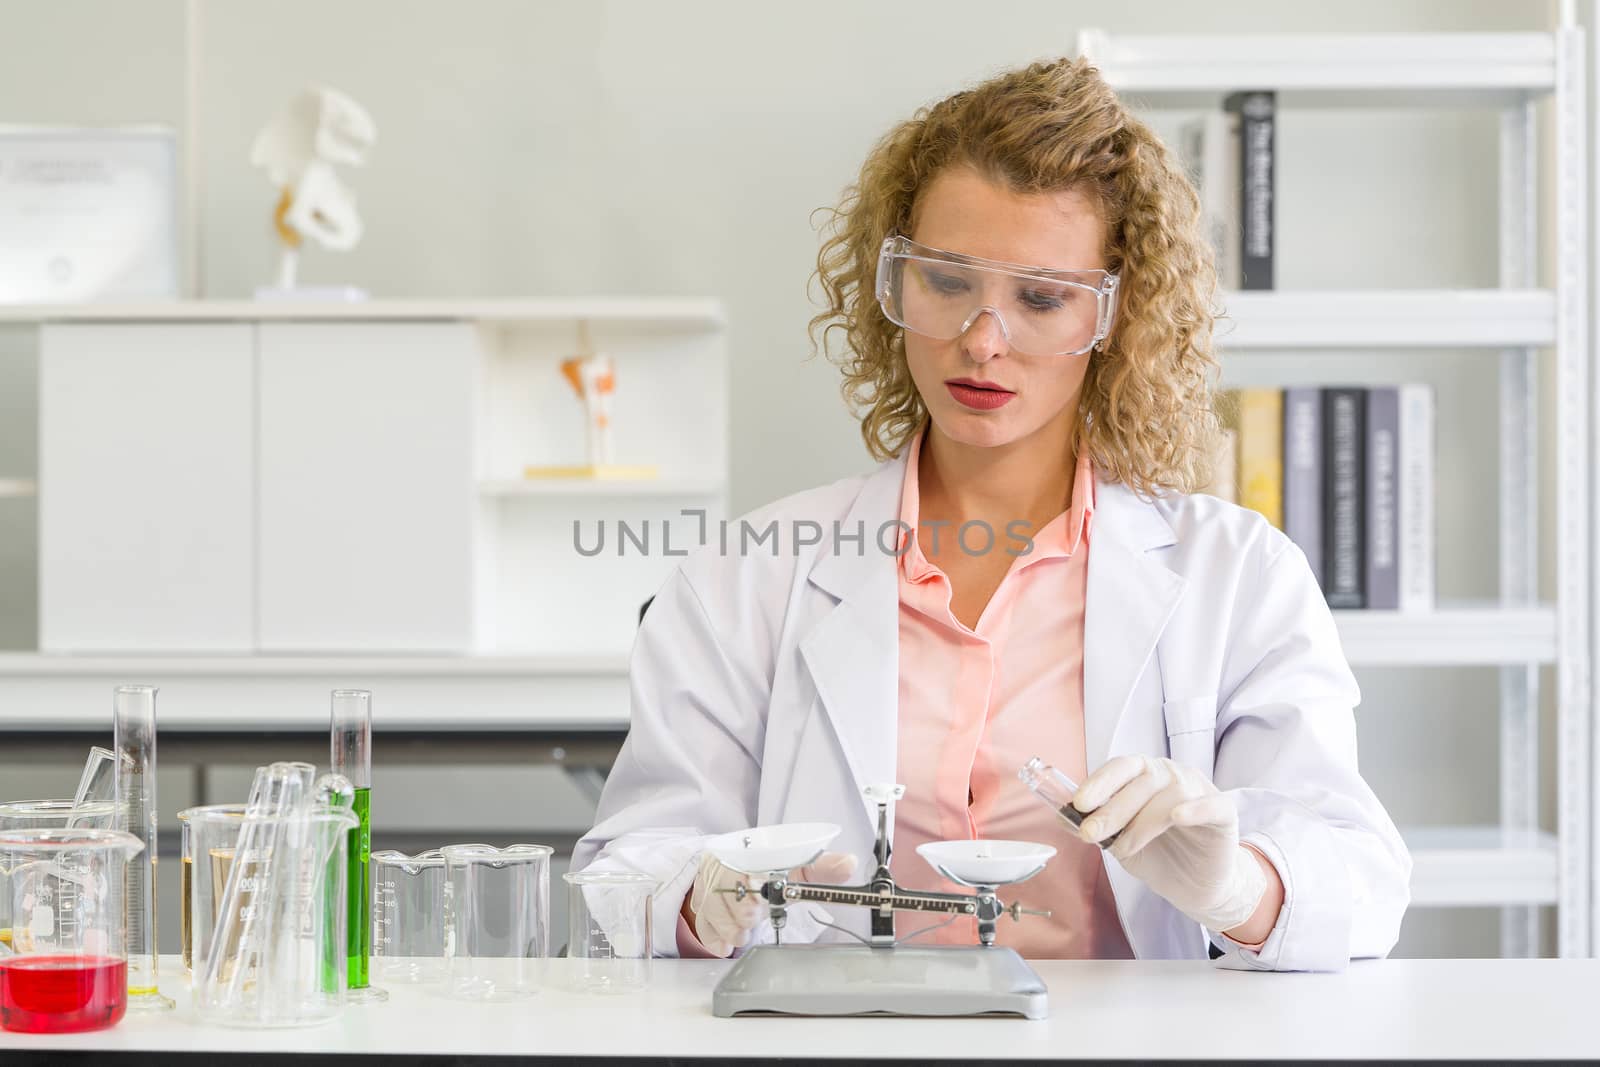 A young blonde scientist is measuring the chemicals for an experiment. Working atmosphere in chemical laboratory. Test tubes and beakers filled with chemicals on the table.